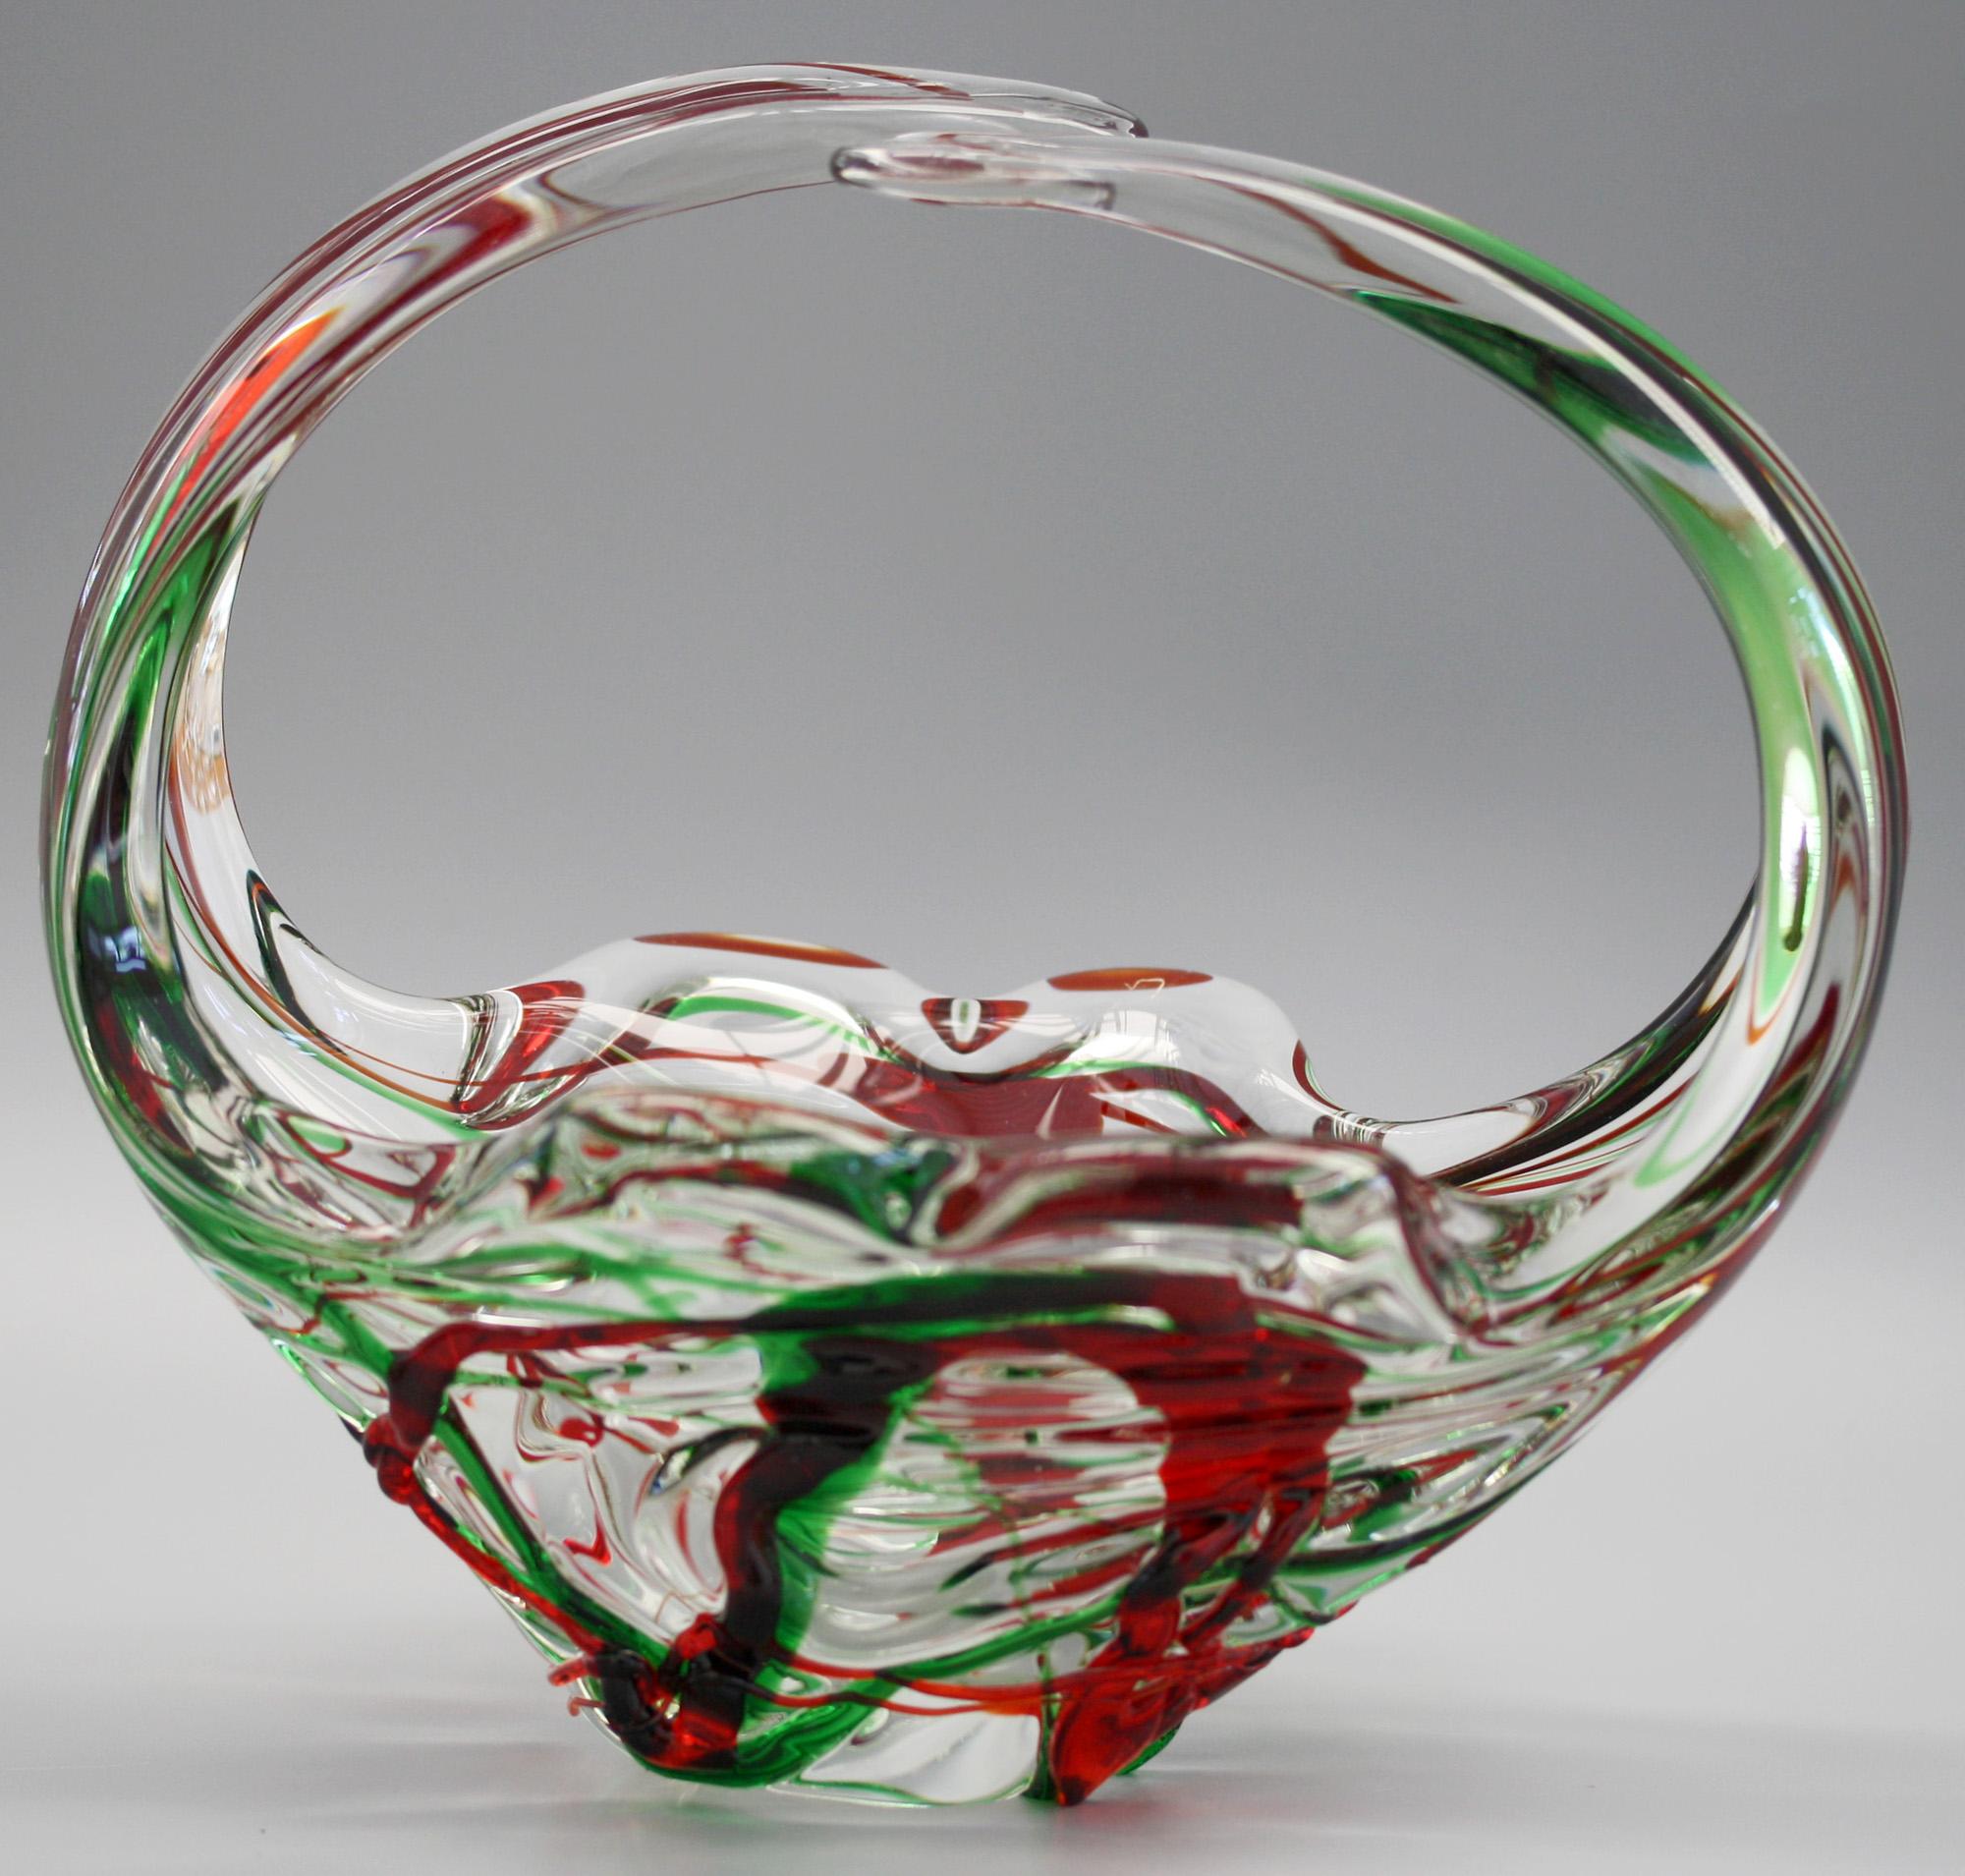 Murano Italian Midcentury Art Glass Bowl with Red and Green Trailed Designs For Sale 9